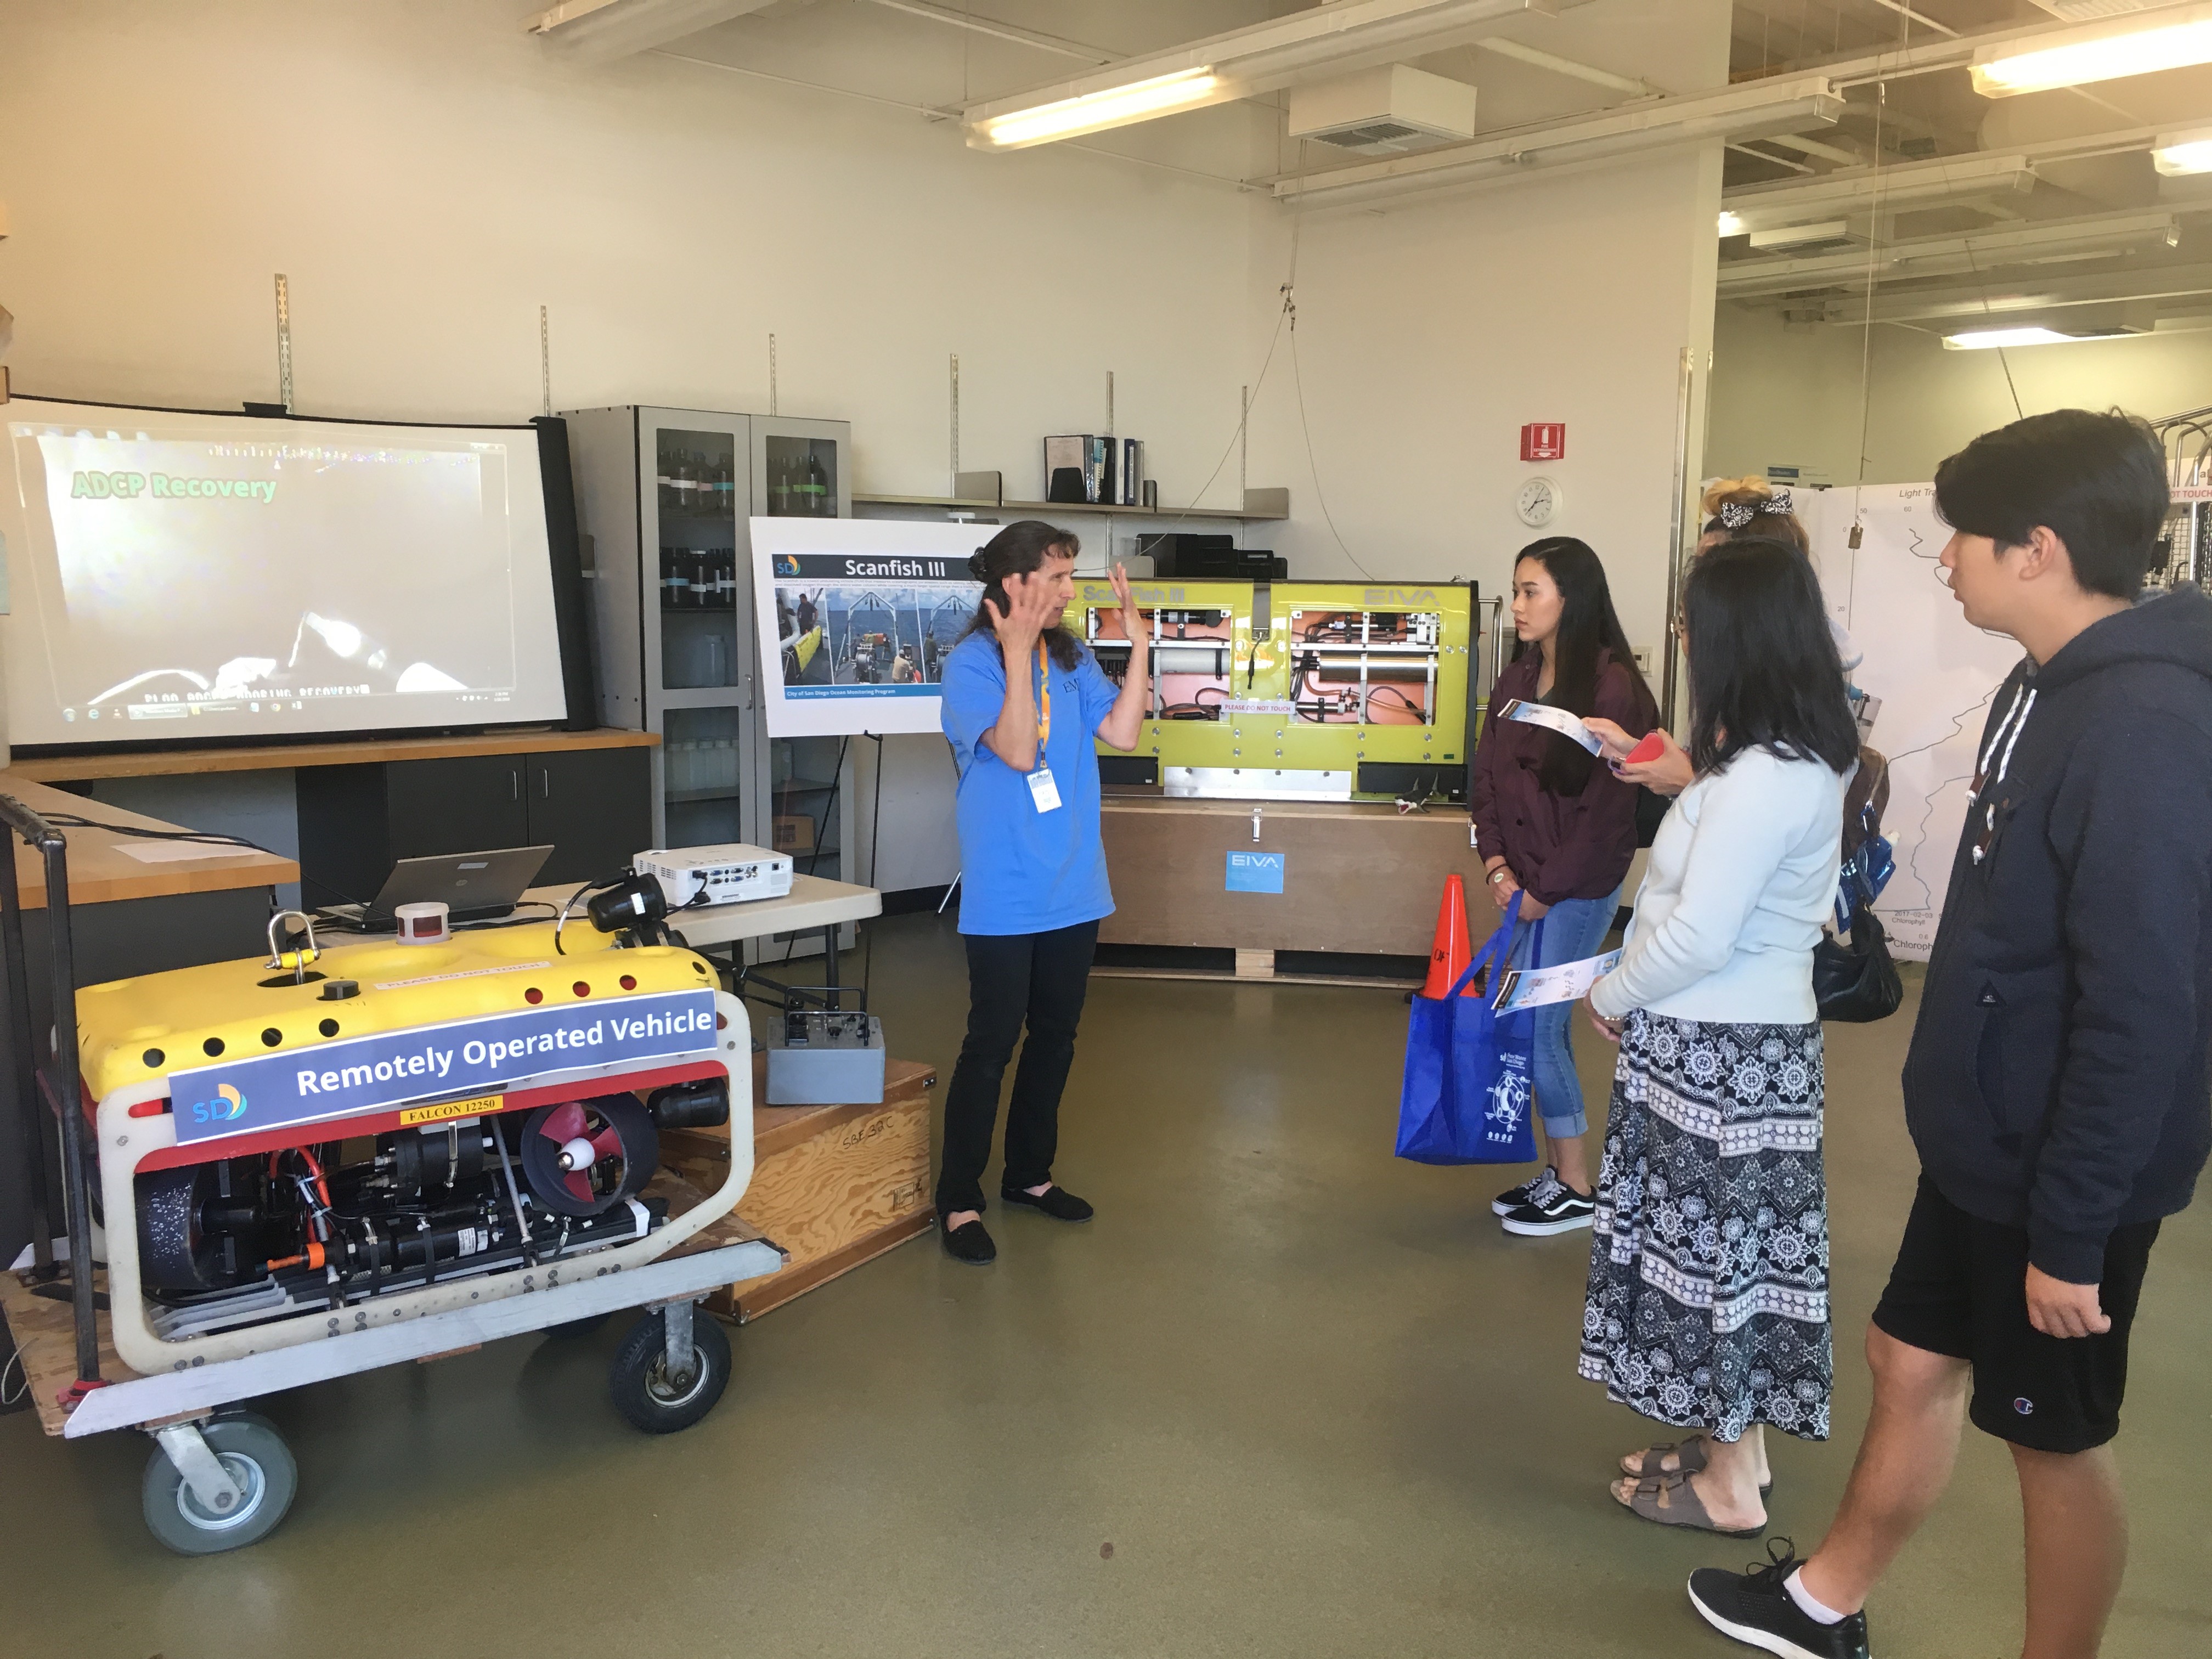 A marine biologist explains the use of the program's ROV, or remotely operated vehicle, to conduct underwater surveys.